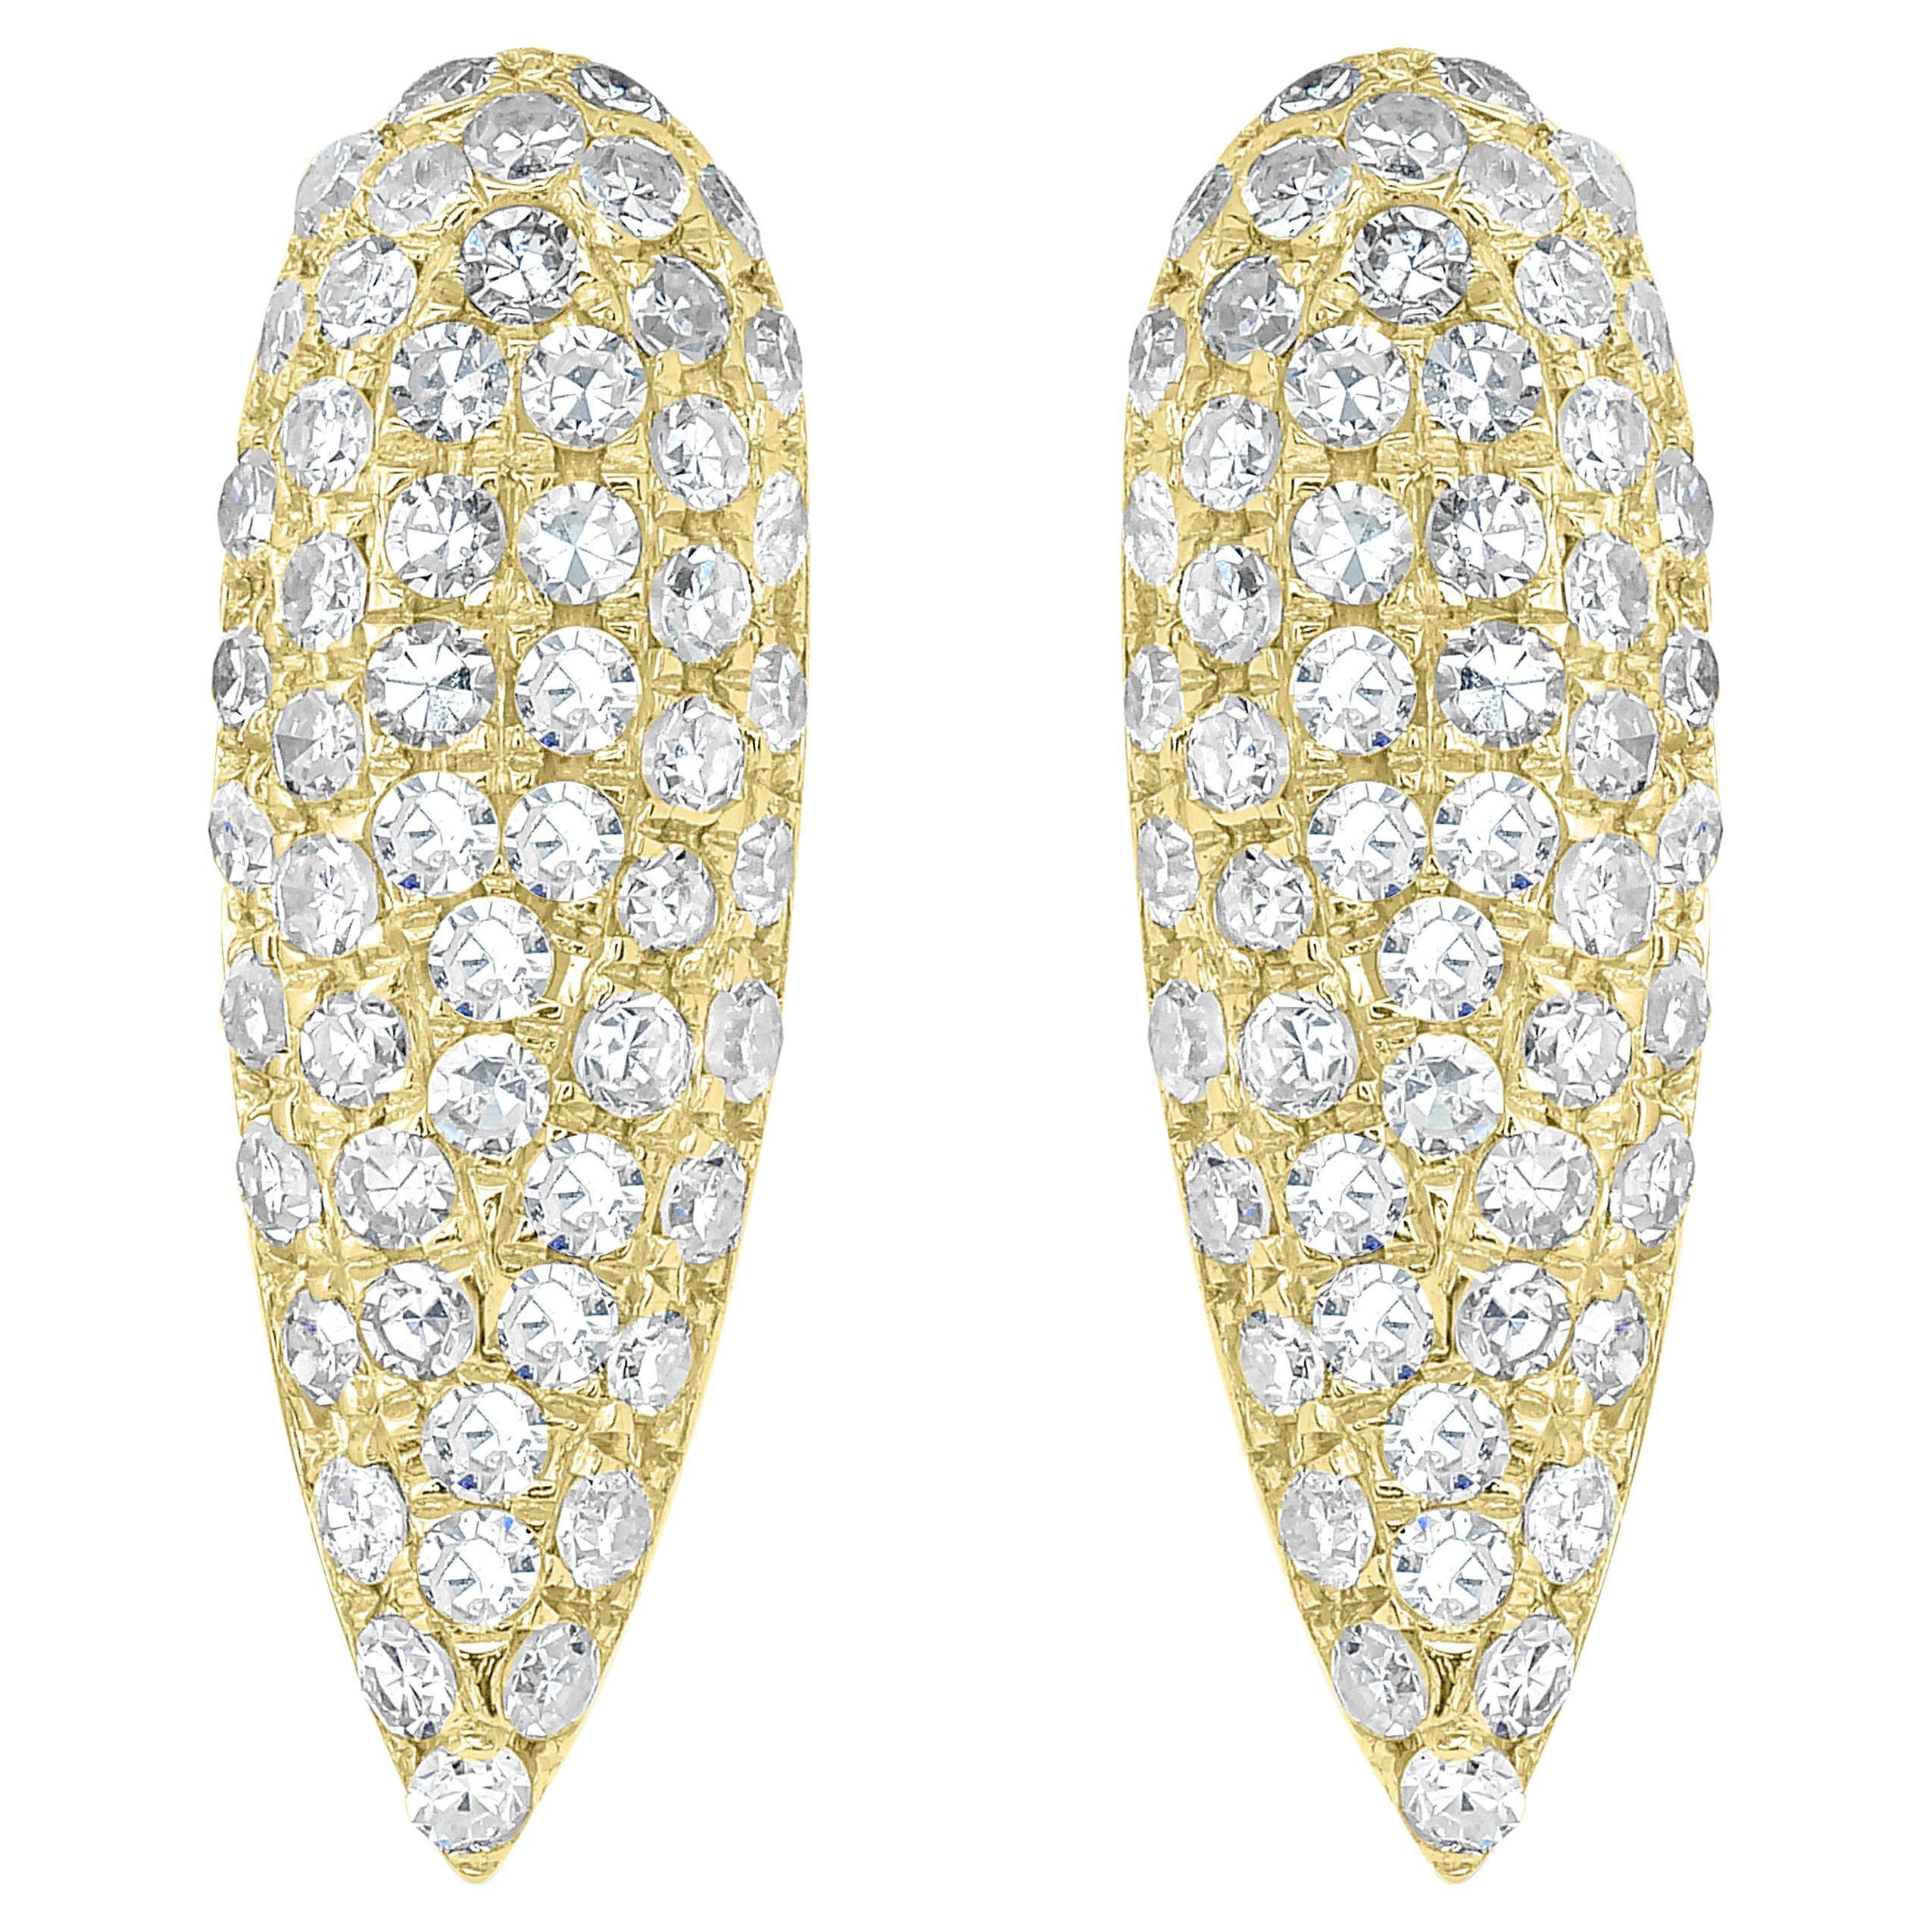 Luxle Round Pave Diamond Pear Stud Earrings in 14k Yellow Gold